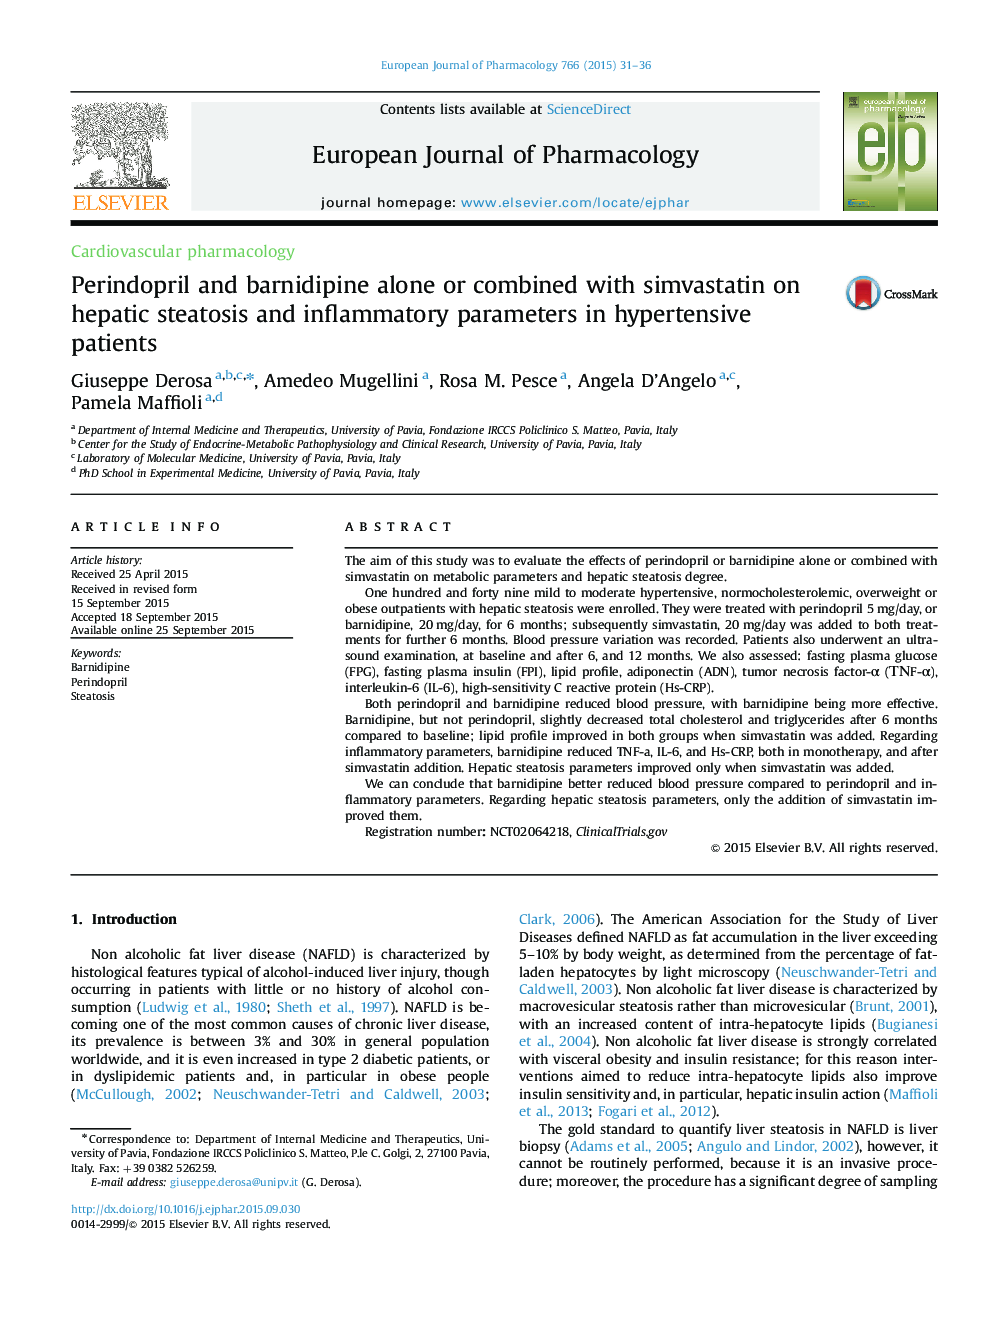 Perindopril and barnidipine alone or combined with simvastatin on hepatic steatosis and inflammatory parameters in hypertensive patients